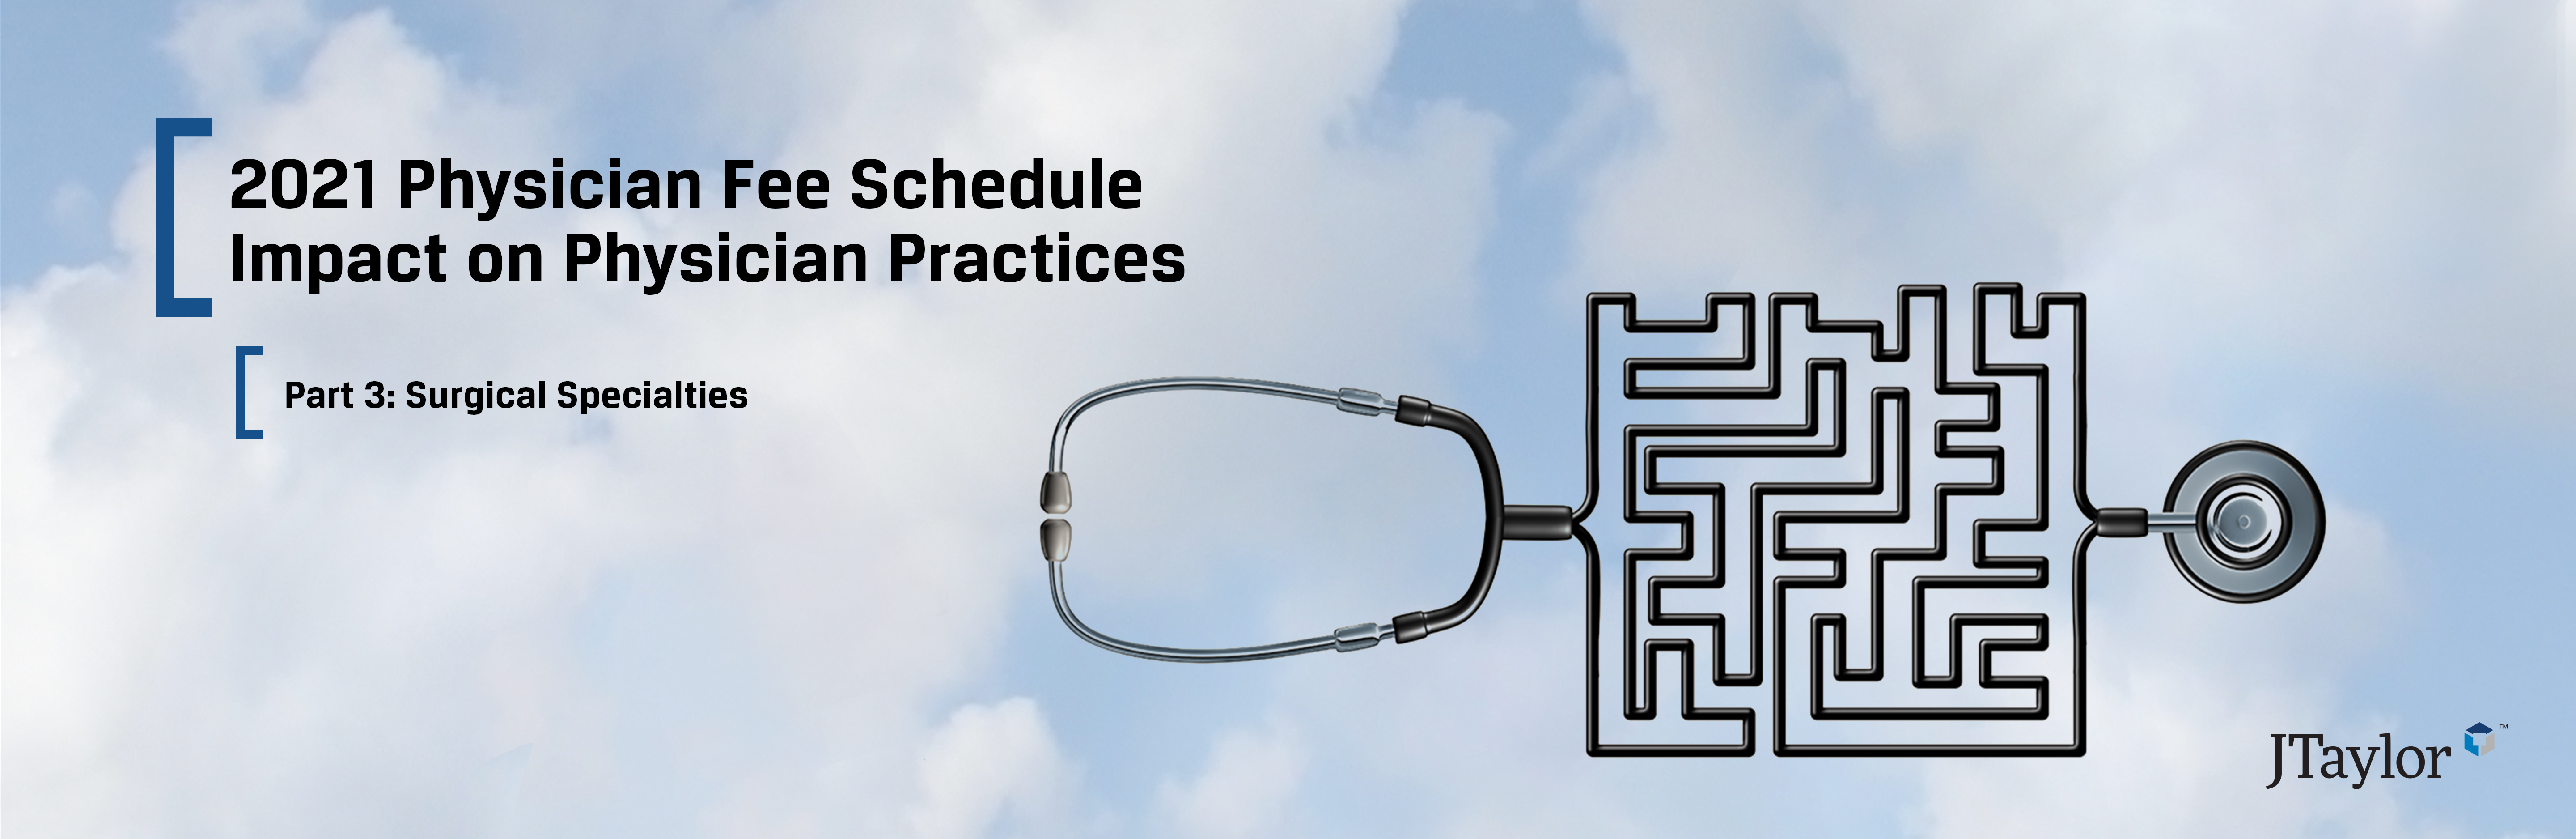 2021 Physician Fee Schedule Impact On Physician Practices - Part 3: Surgical Specialties